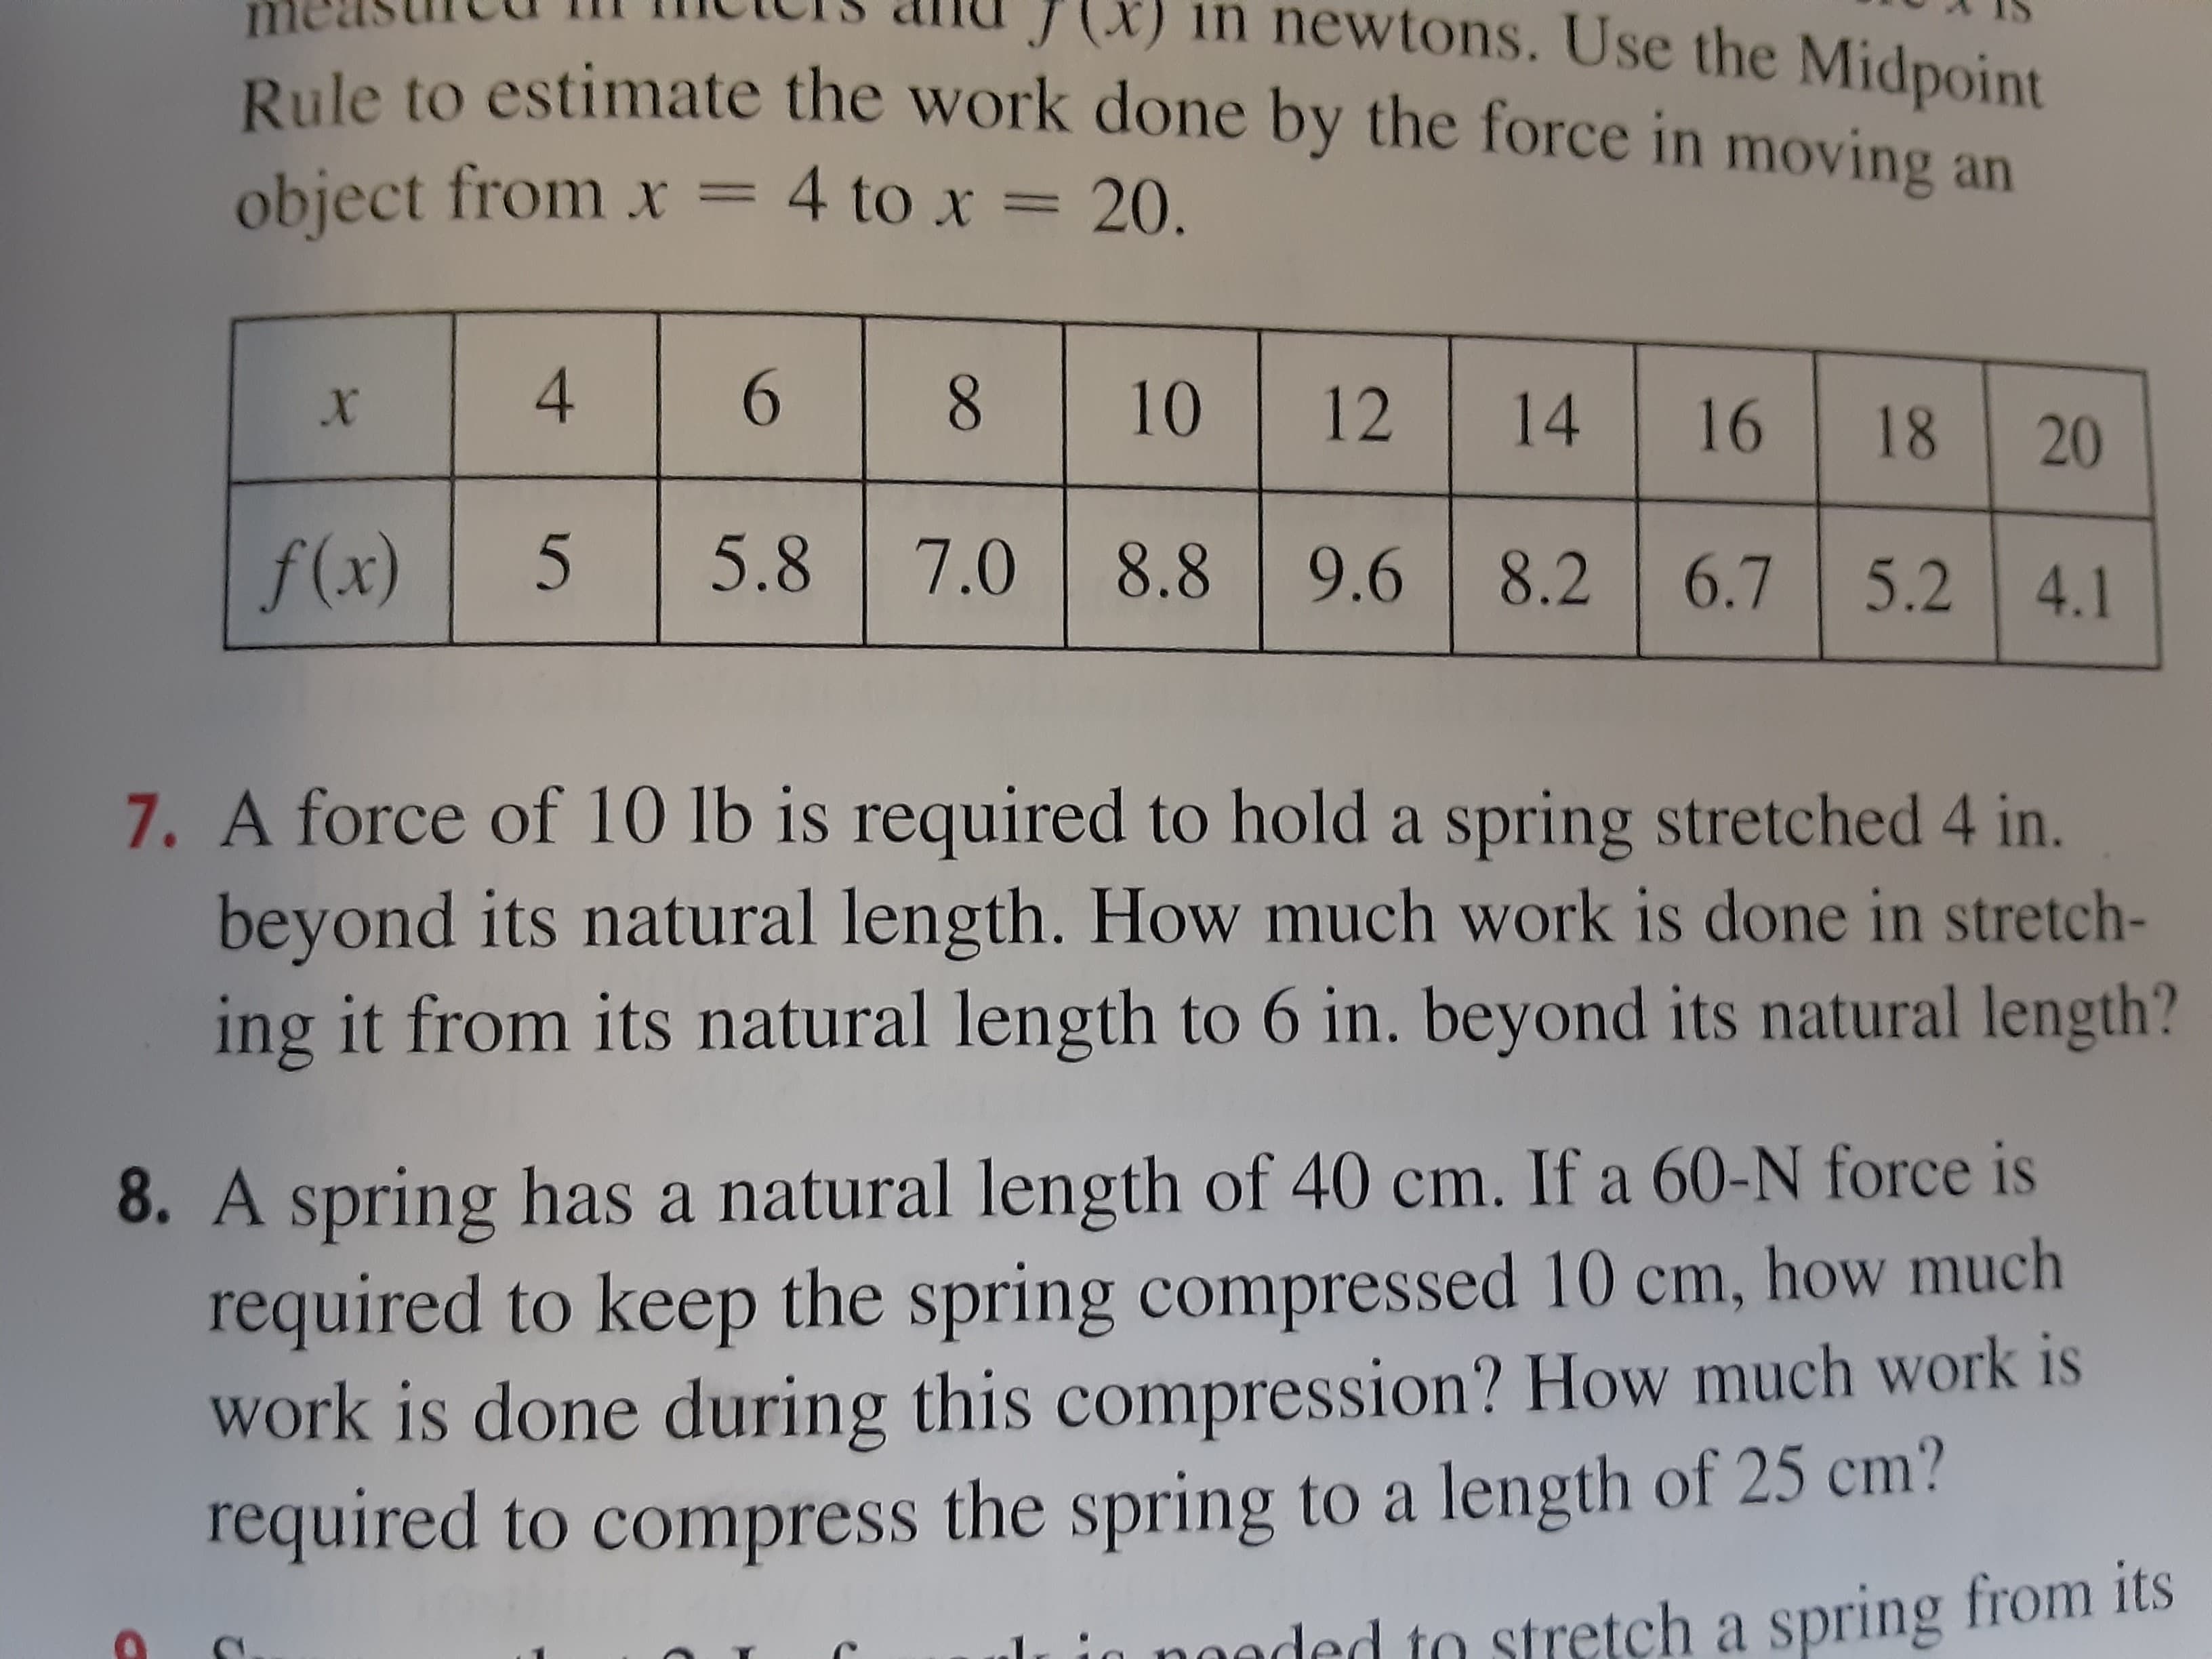 A force of 10 lb is required to hold a spring stretched 4 in.
beyond its natural length. How much work is done in stretch
ing it from its natural length to 6 in. beyond its natural length?
